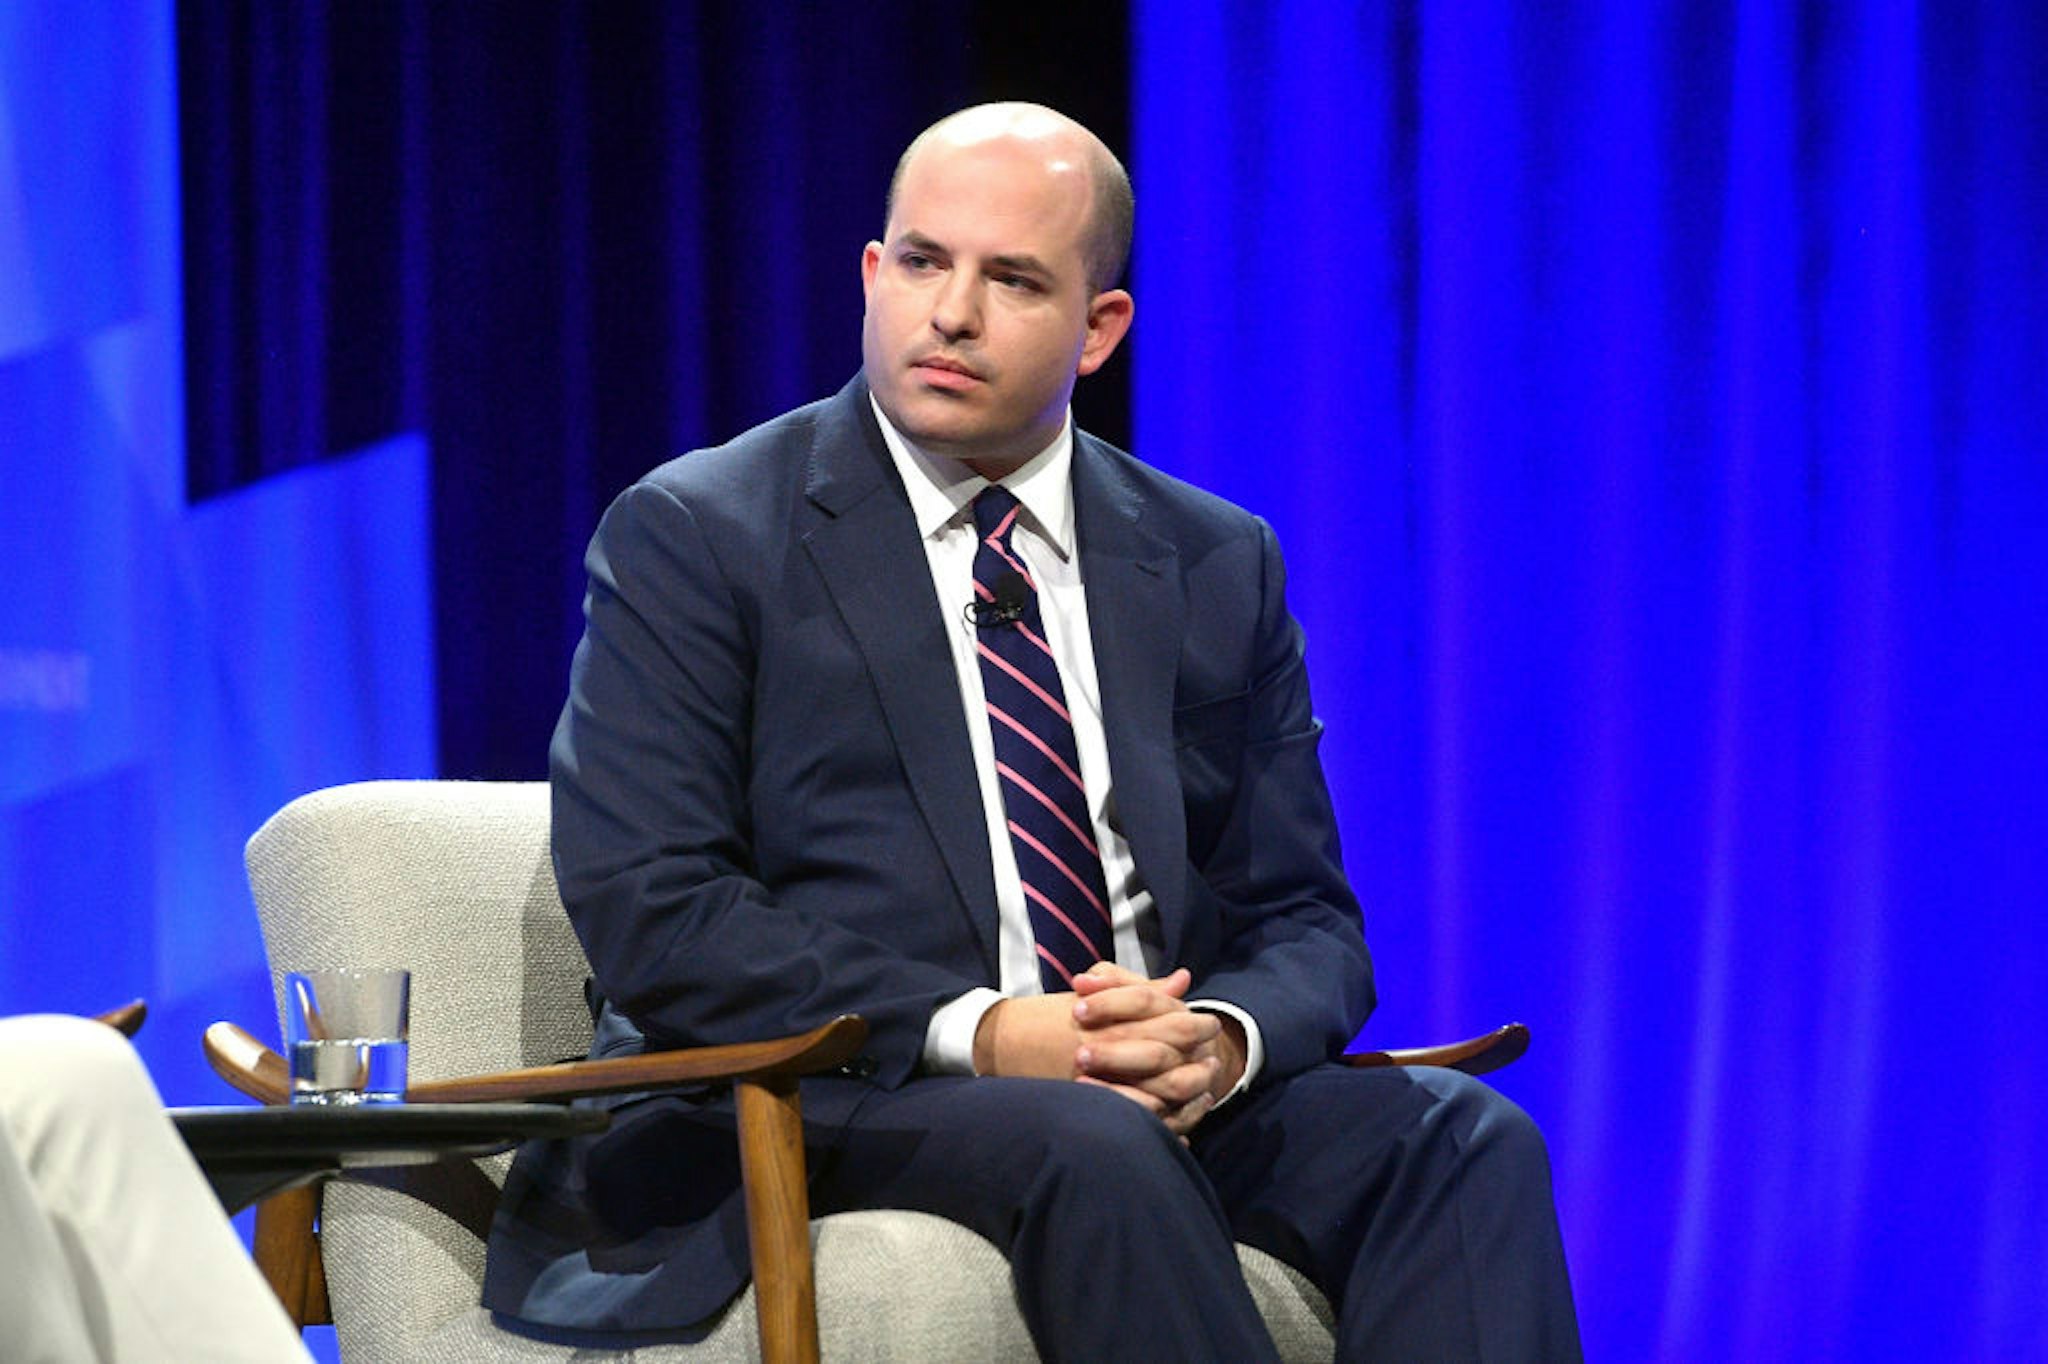 BEVERLY HILLS, CALIFORNIA - OCTOBER 22: Brian Stelter, Chief Media Correspondent for CNN speaks onstage during 'Discovery Gets Cooking' at Vanity Fair's 6th Annual New Establishment Summit at Wallis Annenberg Center for the Performing Arts on October 22, 2019 in Beverly Hills, California. (Photo by Matt Winkelmeyer/Getty Images for Vanity Fair)